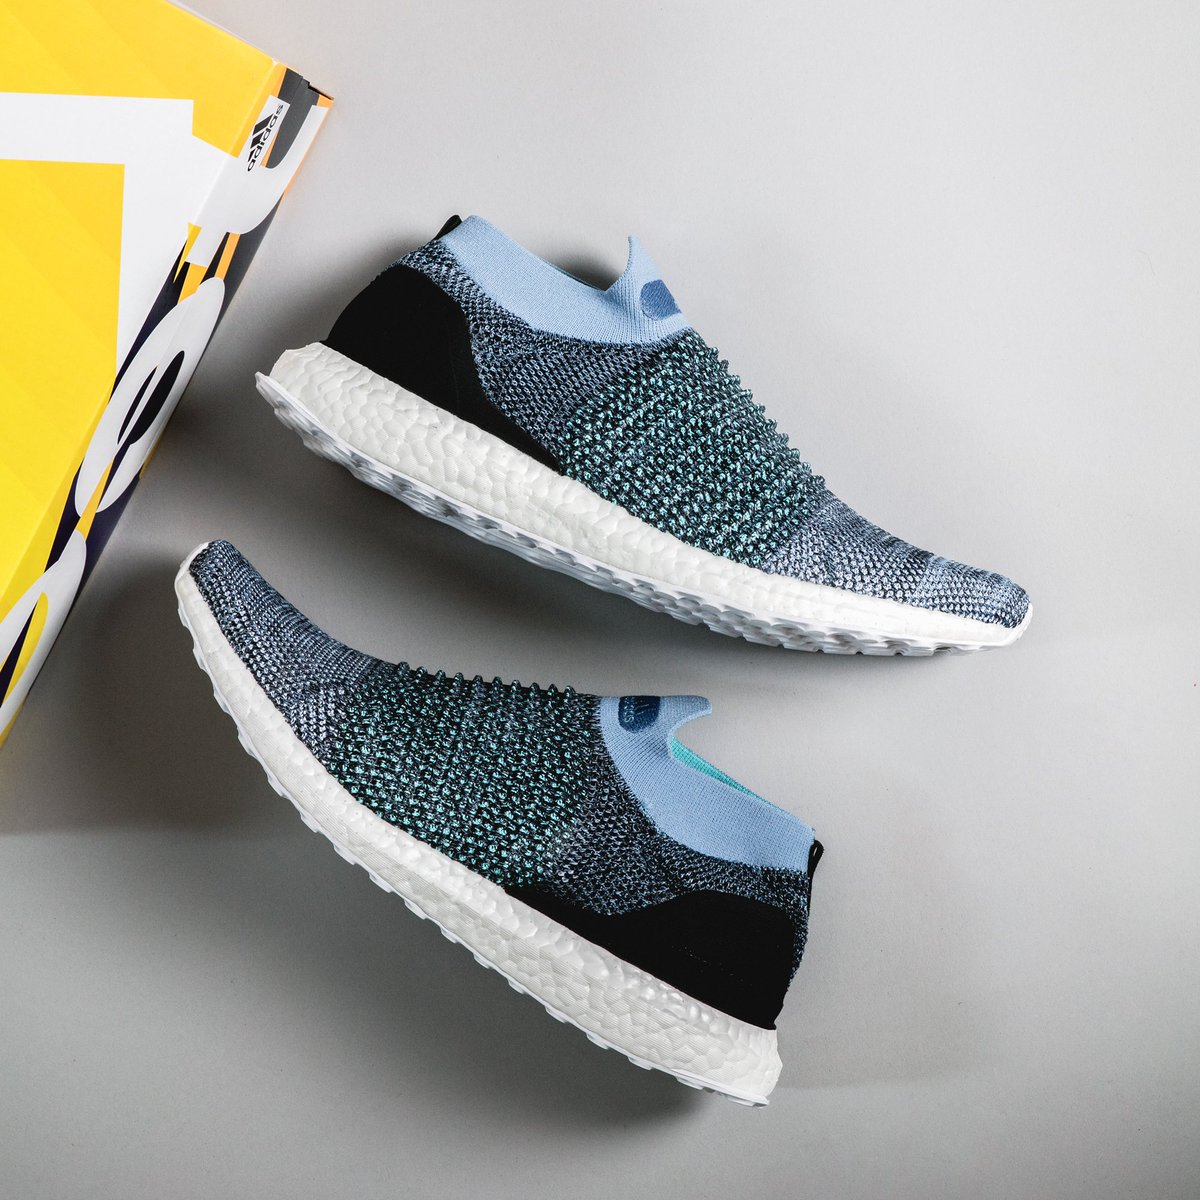 Parley x adidas Ultra Boost Laceless 